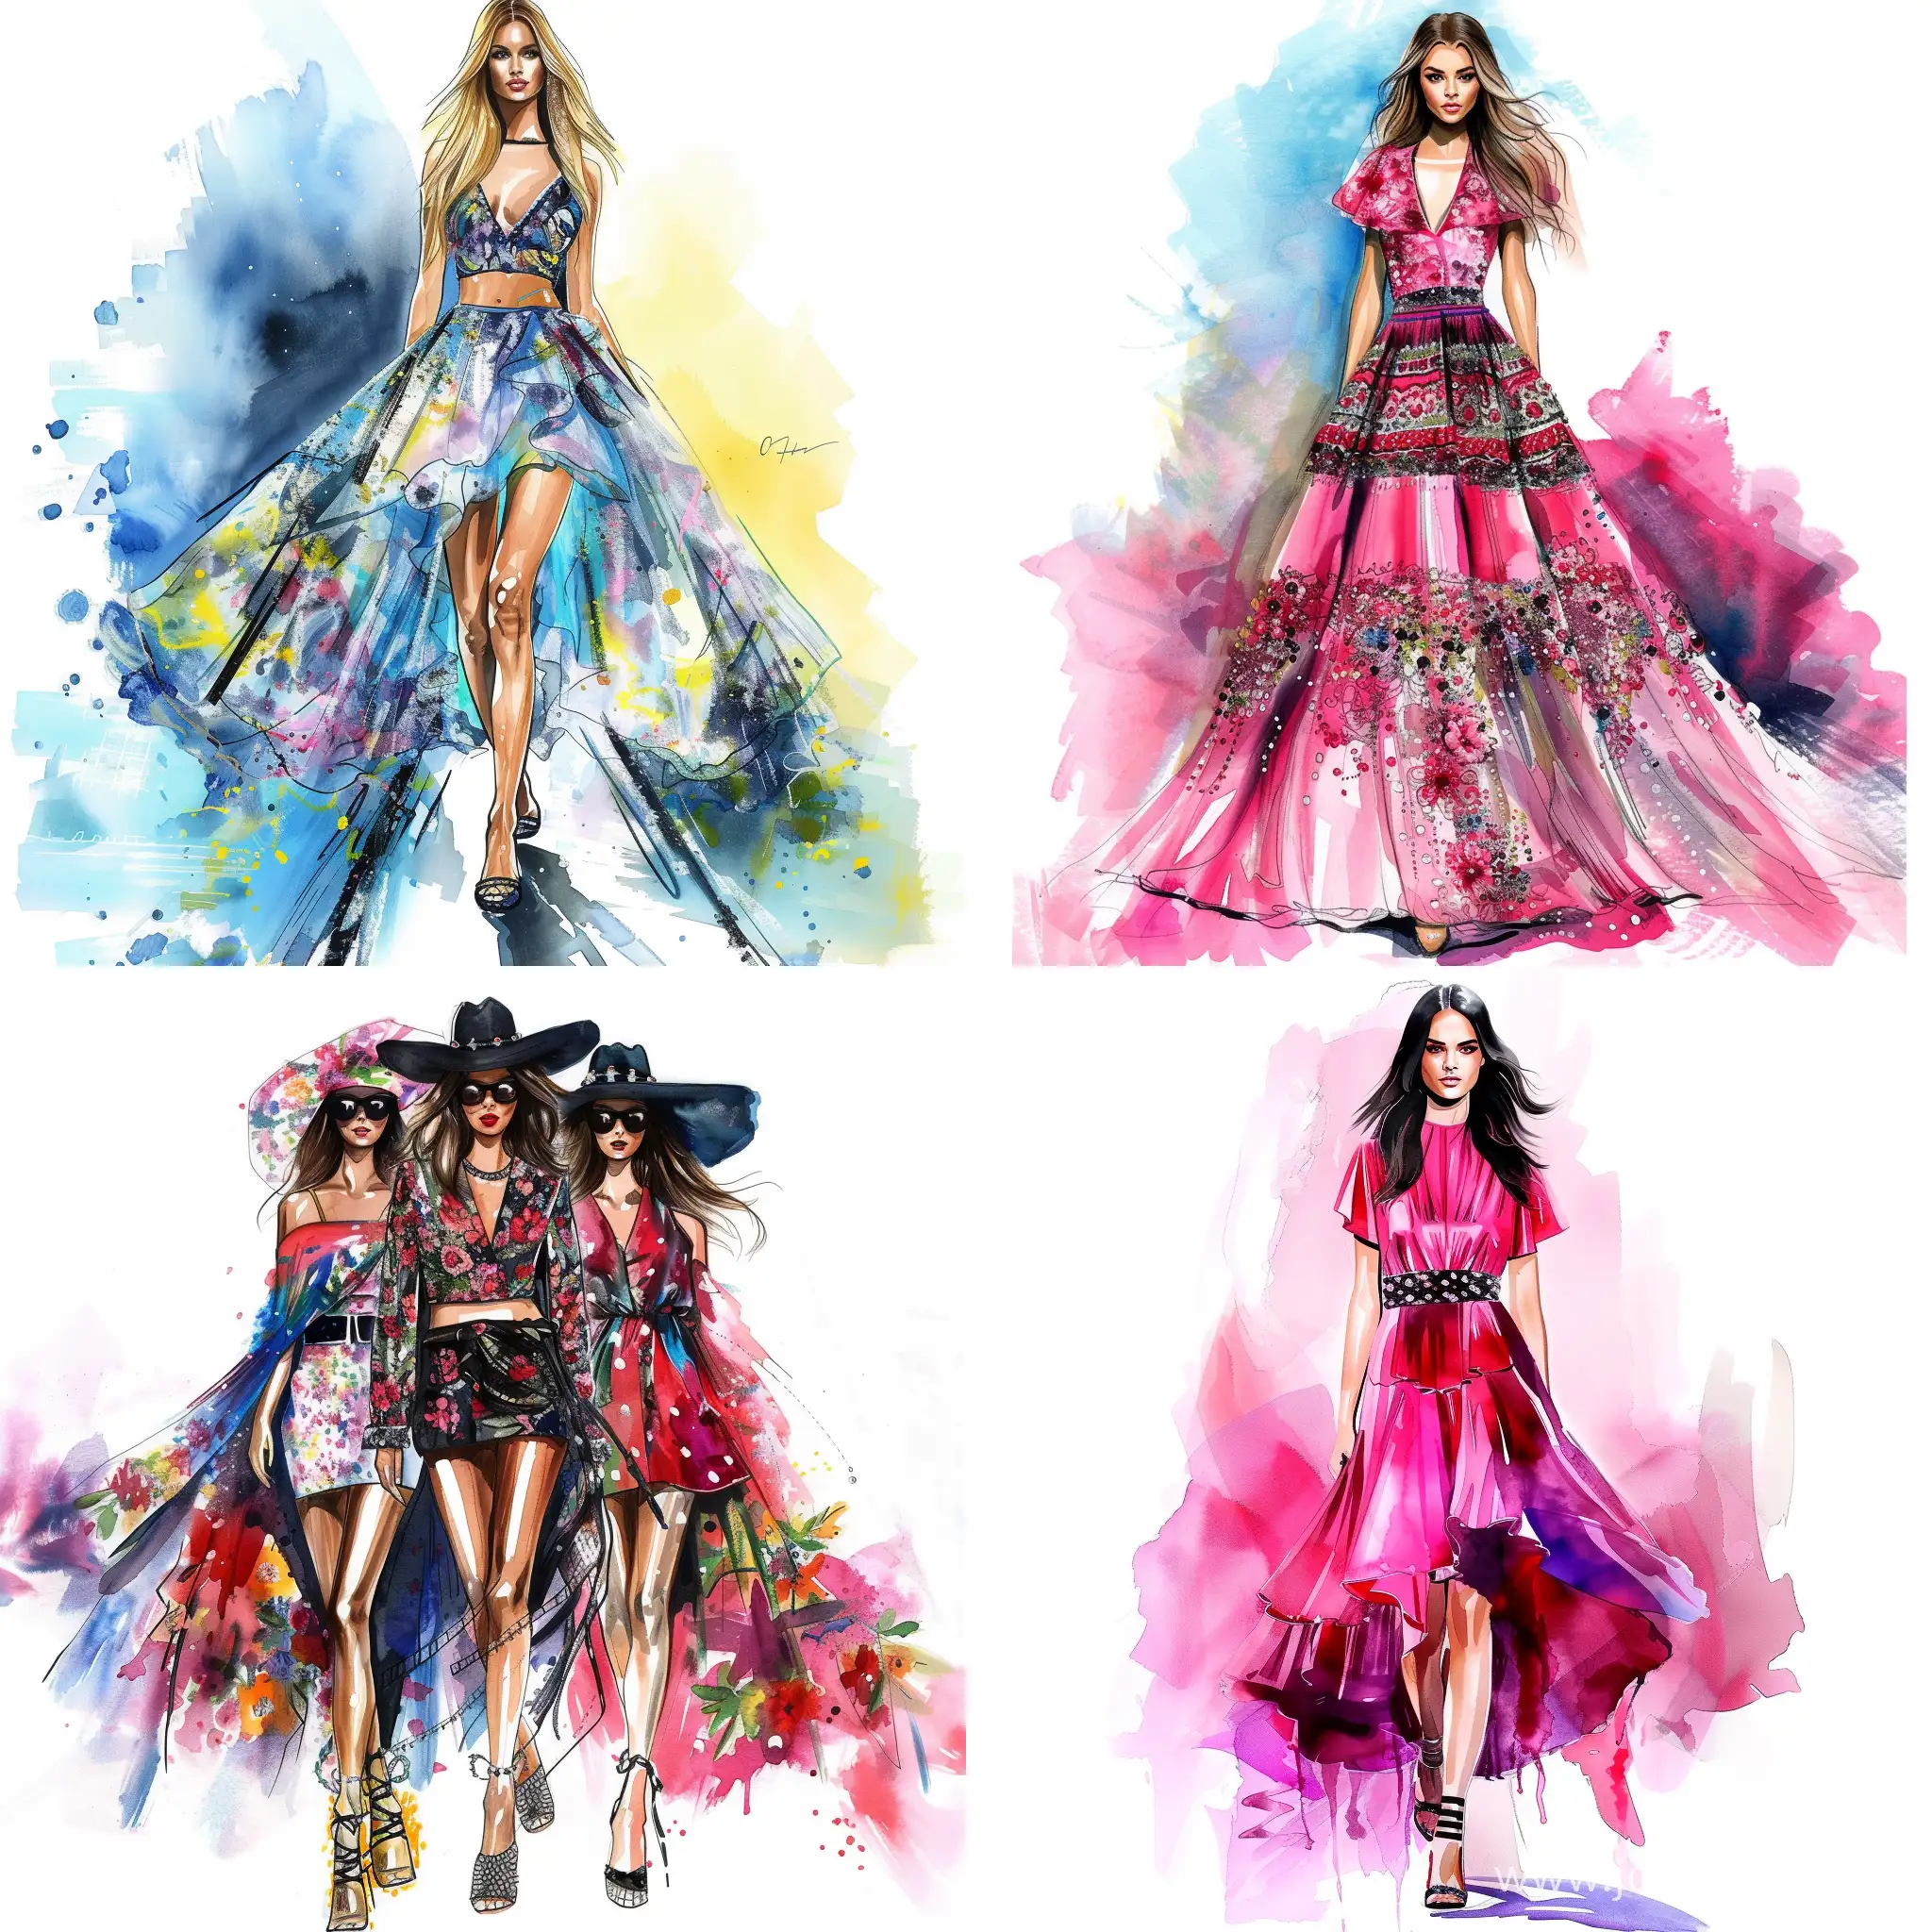 Fashion illustration, beautiful, fashionable images from the runway